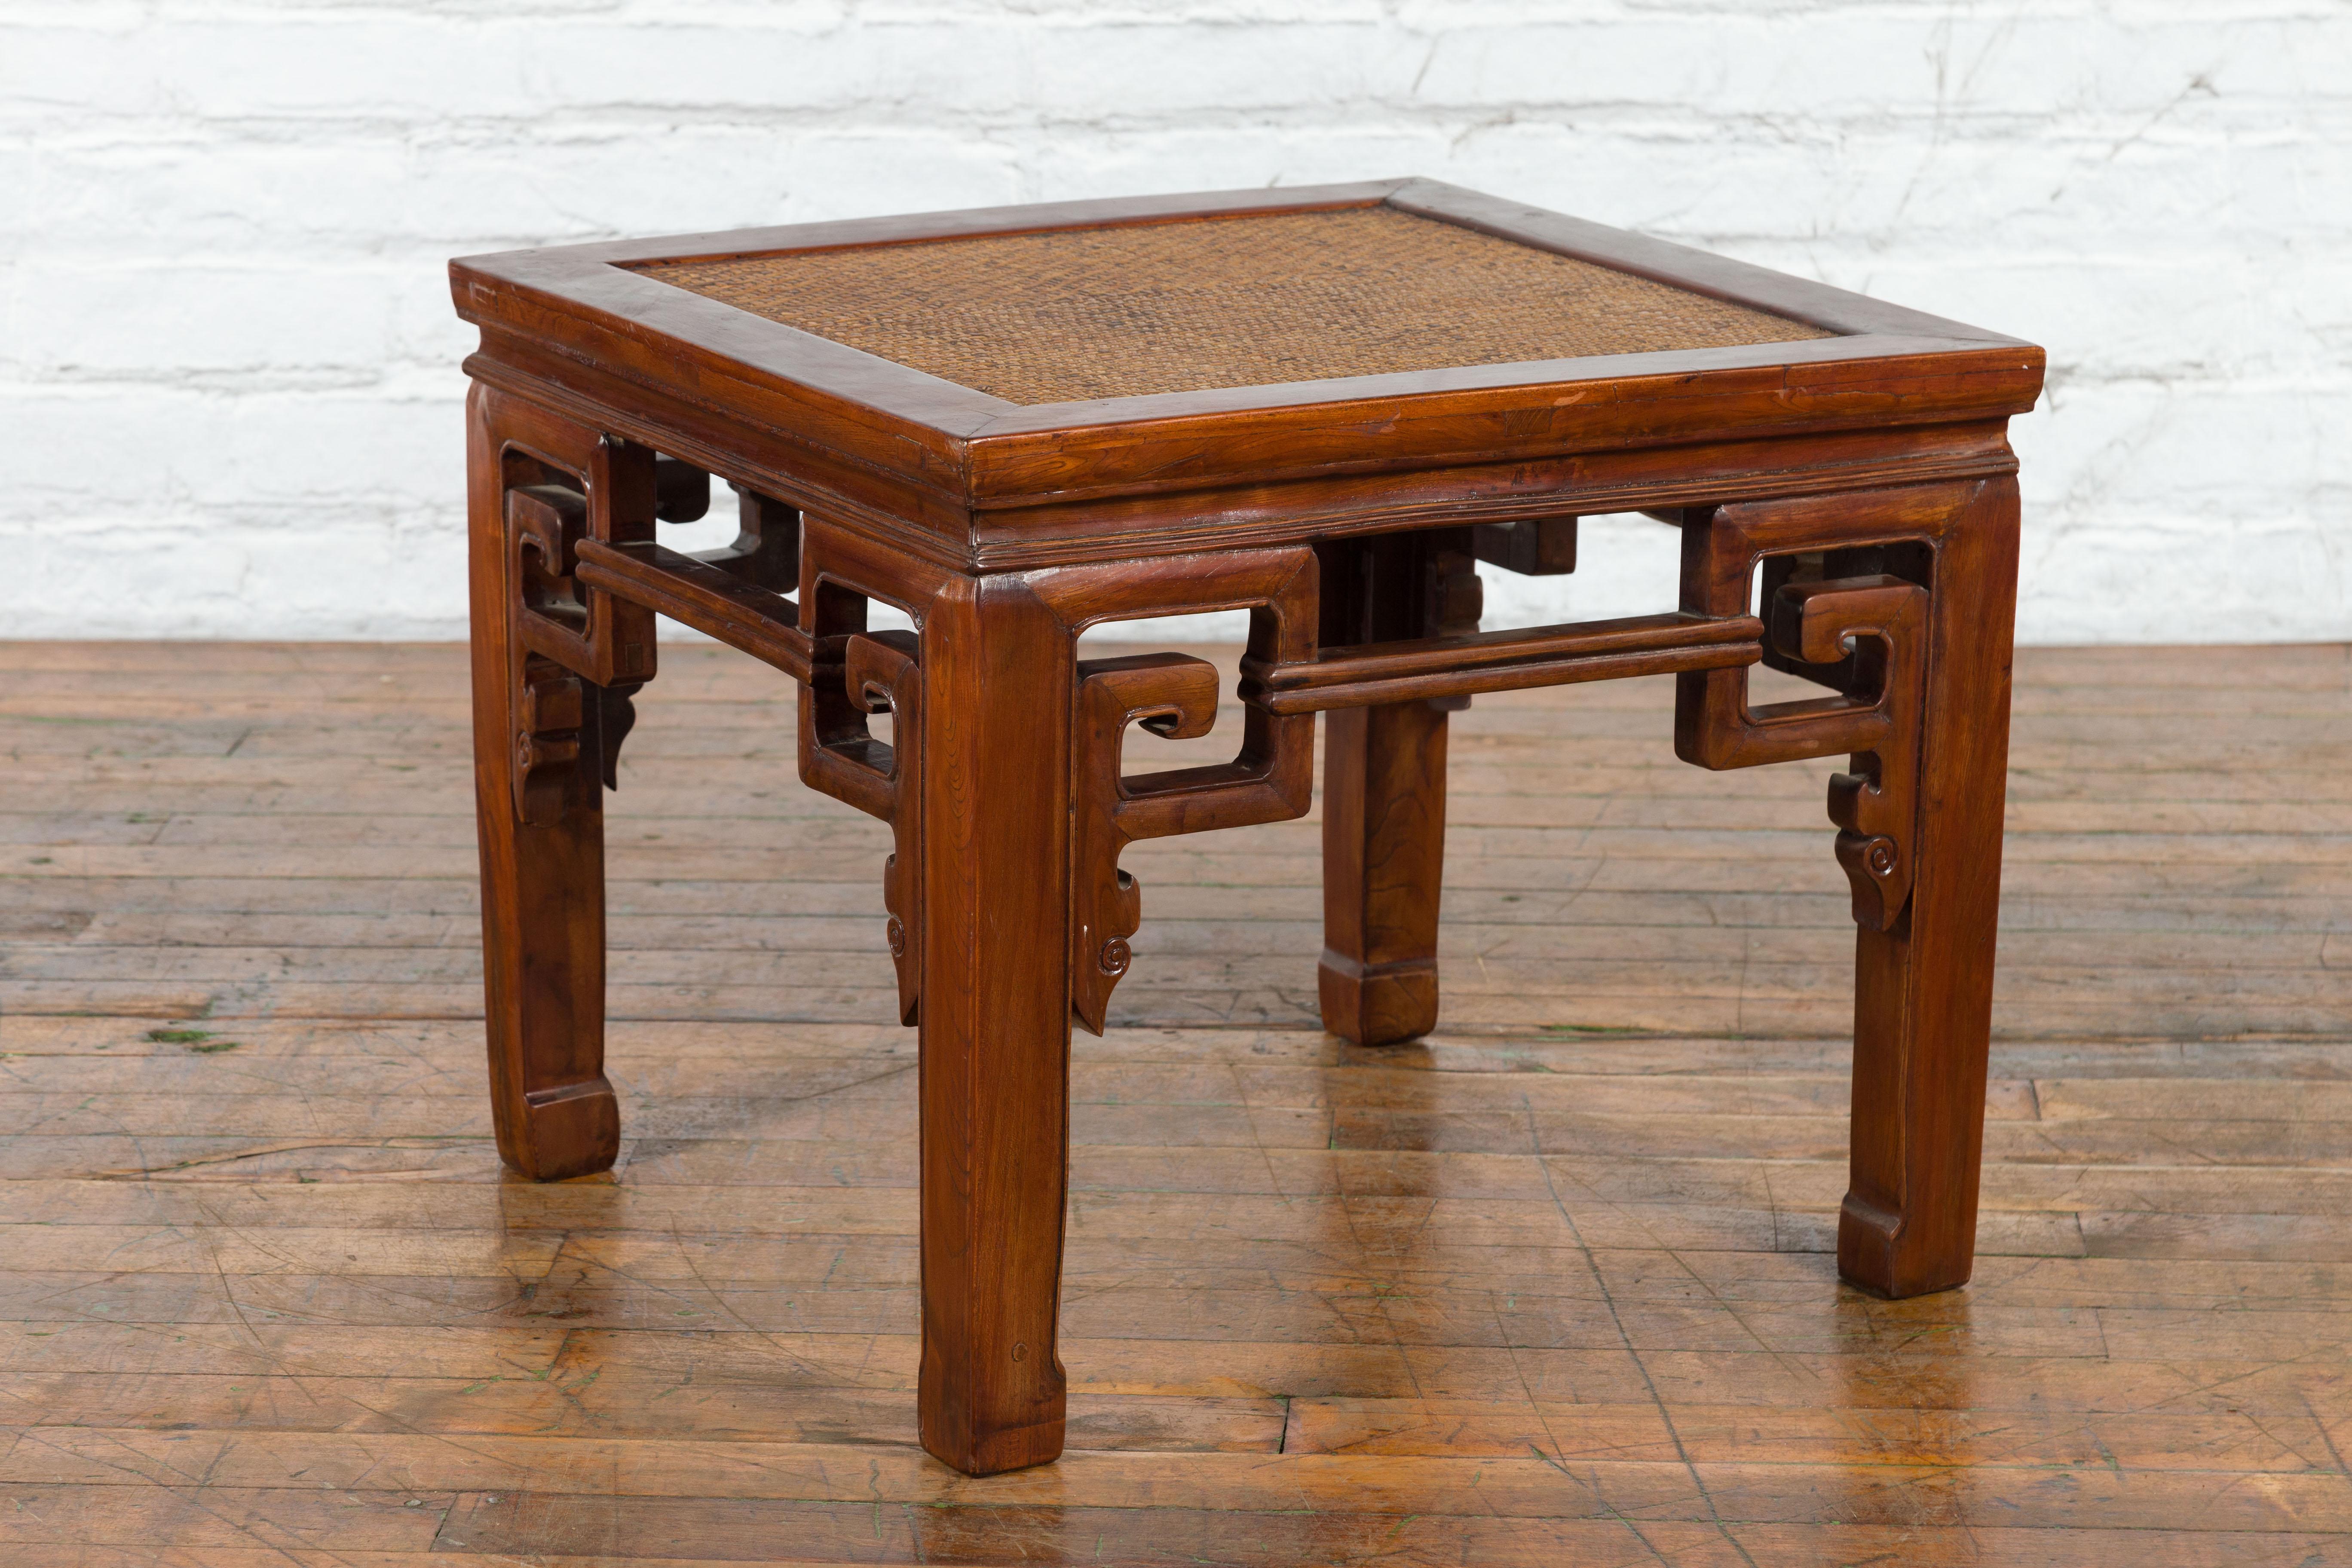 Carved Chinese Qing Dynasty 19th Century Stool or Drinks Table with Woven Rattan Top For Sale